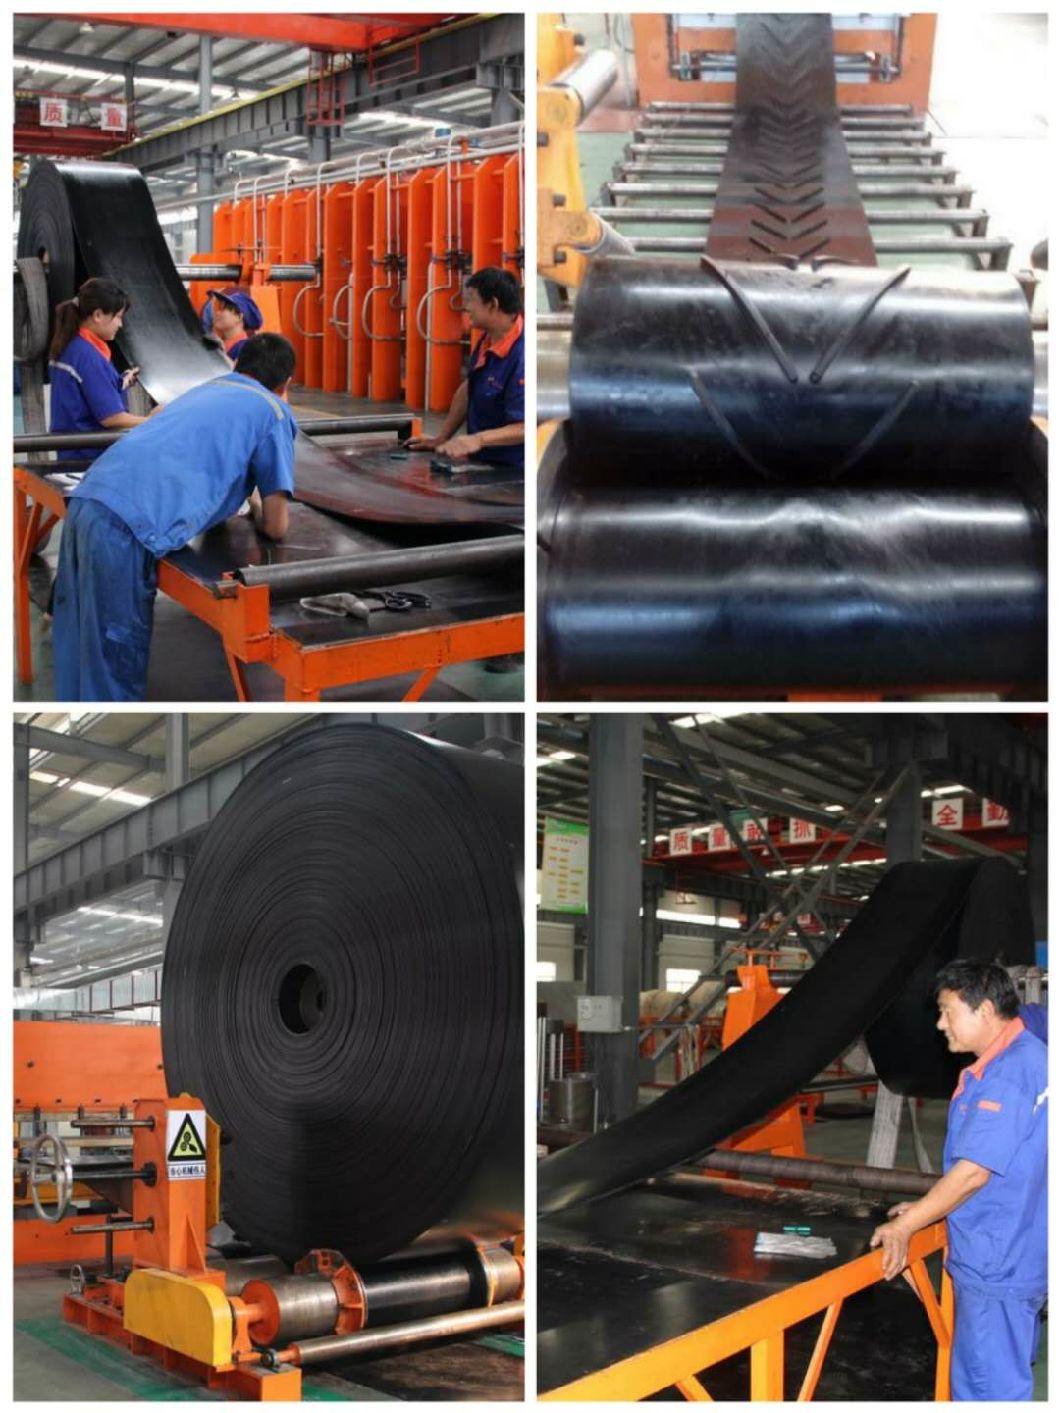 ISO Standard Black Rubber Conveyor Belt with Good Performance for Mining Industry